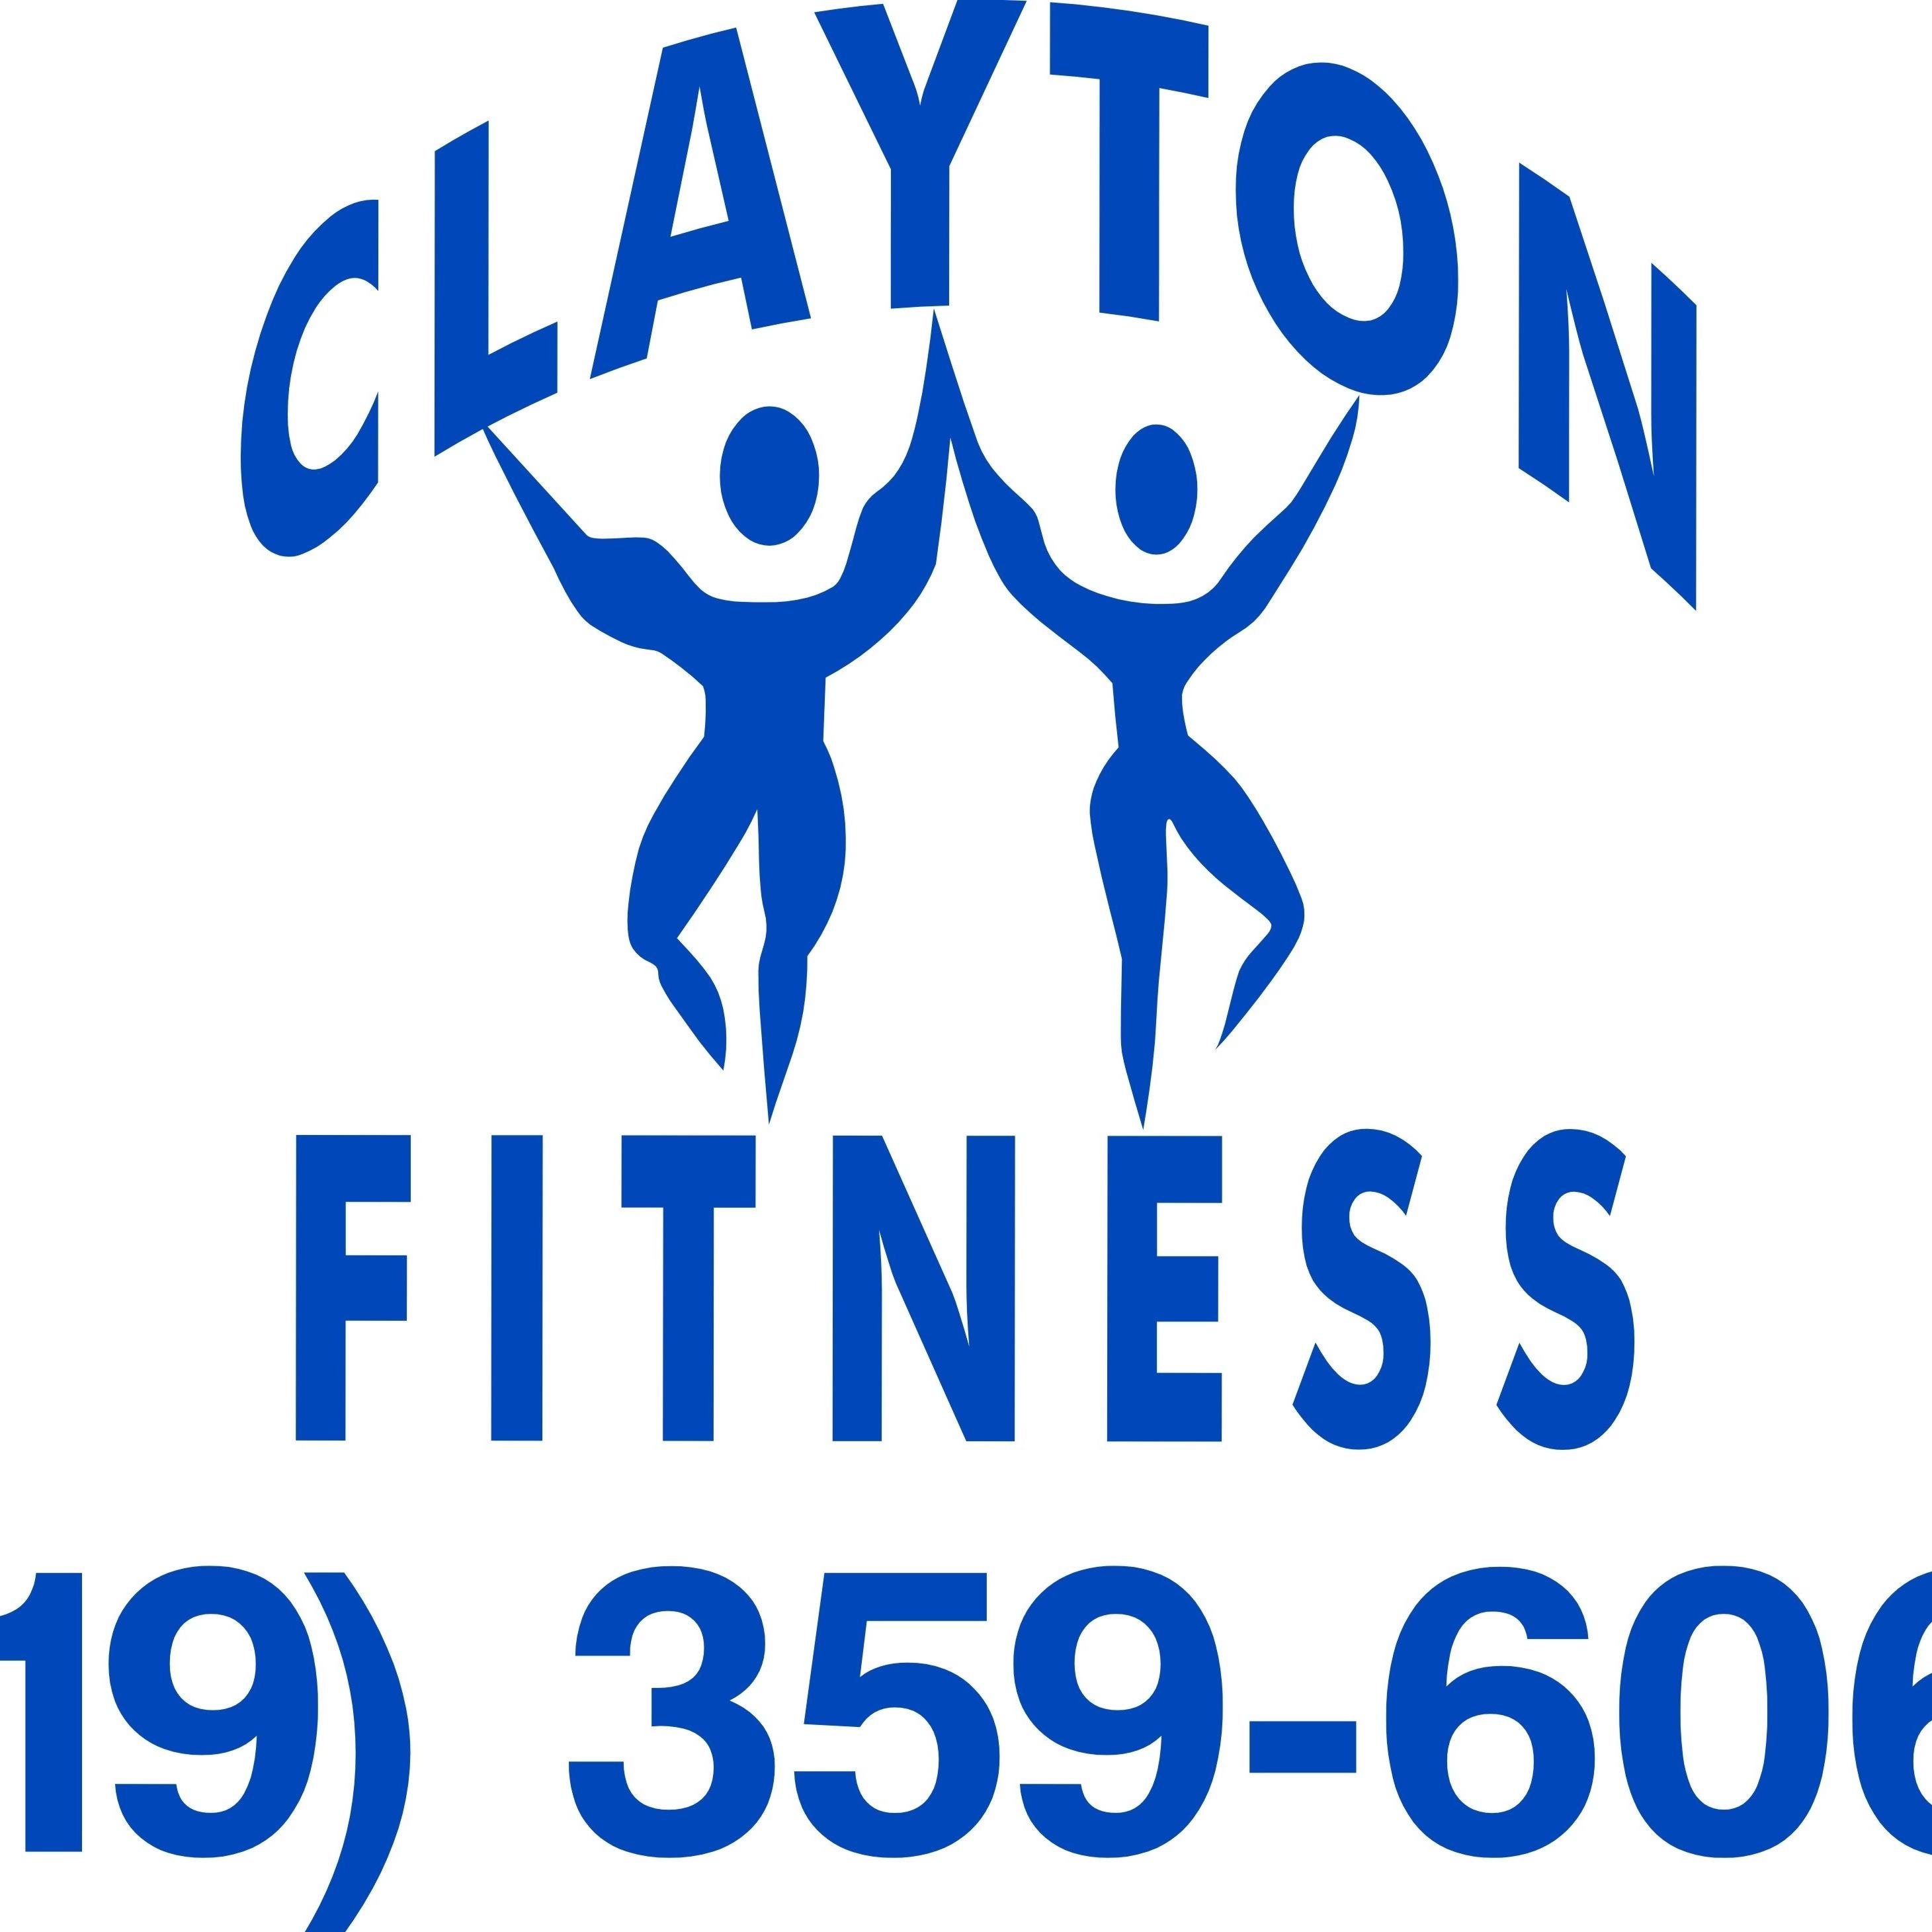 Your Clayton Fitness Membership includes Childcare, Classes,  Equipment, Racquetball, Basketball and Tanning!